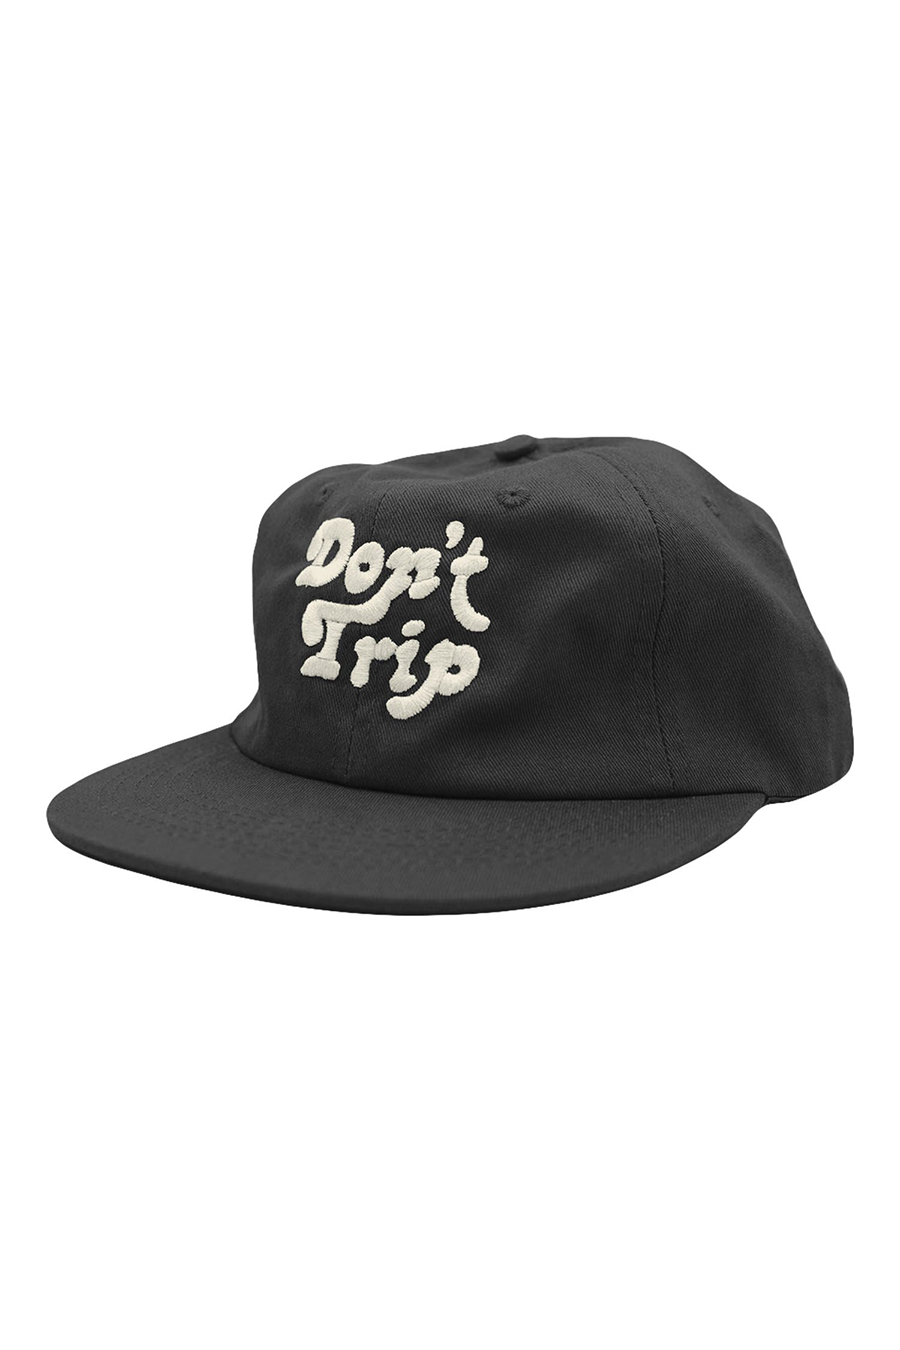 Don't Trip Unstructured Hat | Charcoal - Main Image Number 1 of 1